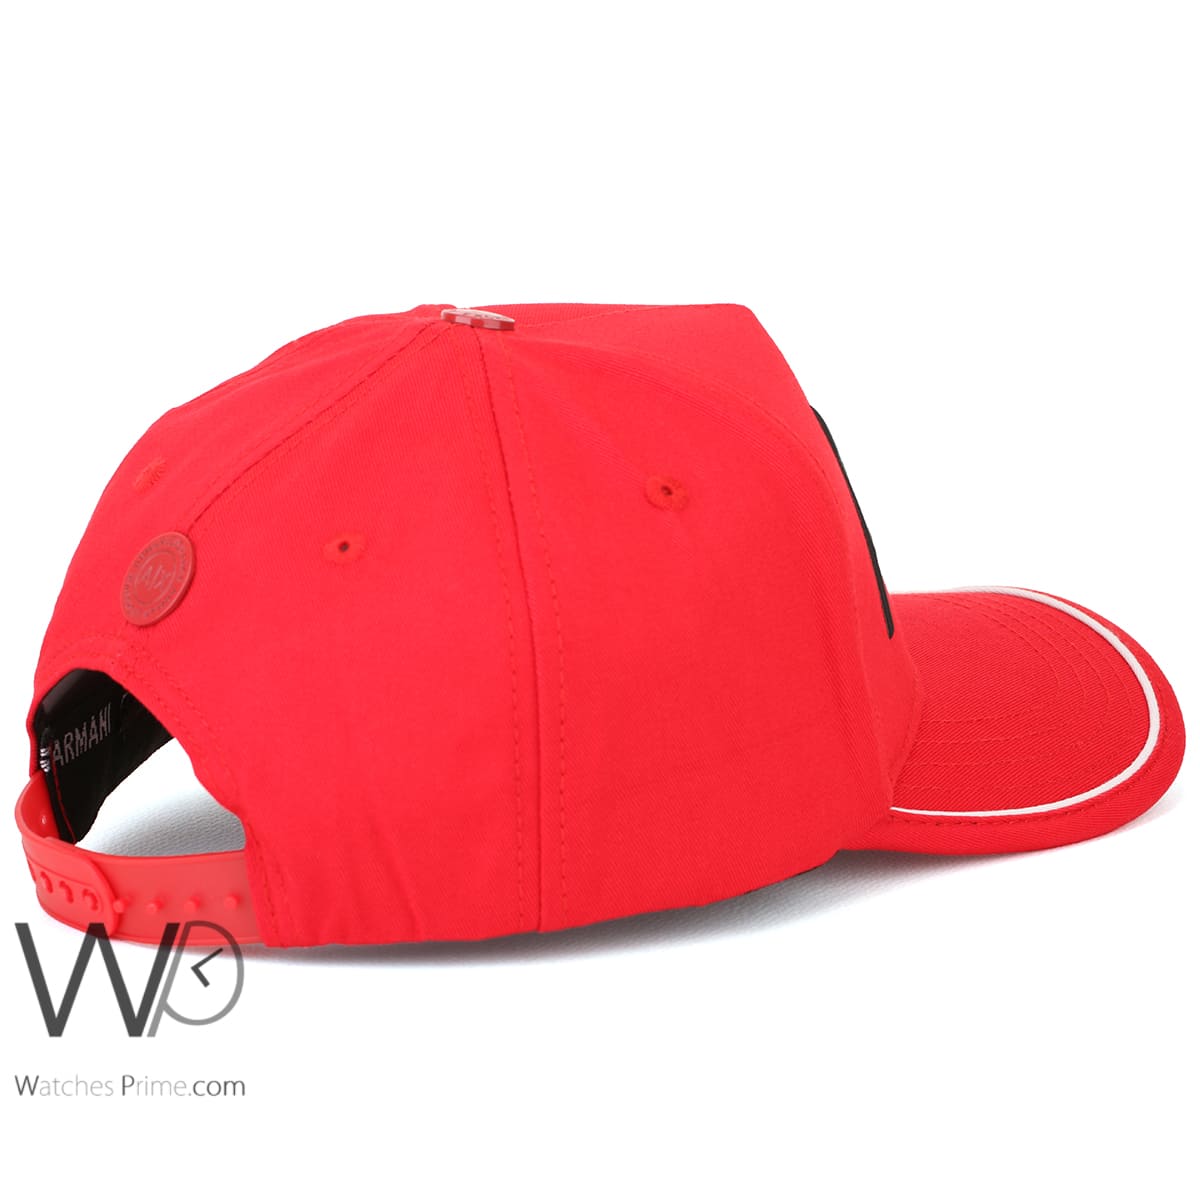 Armani Exchange AX Red Baseball Cap | Watches Prime